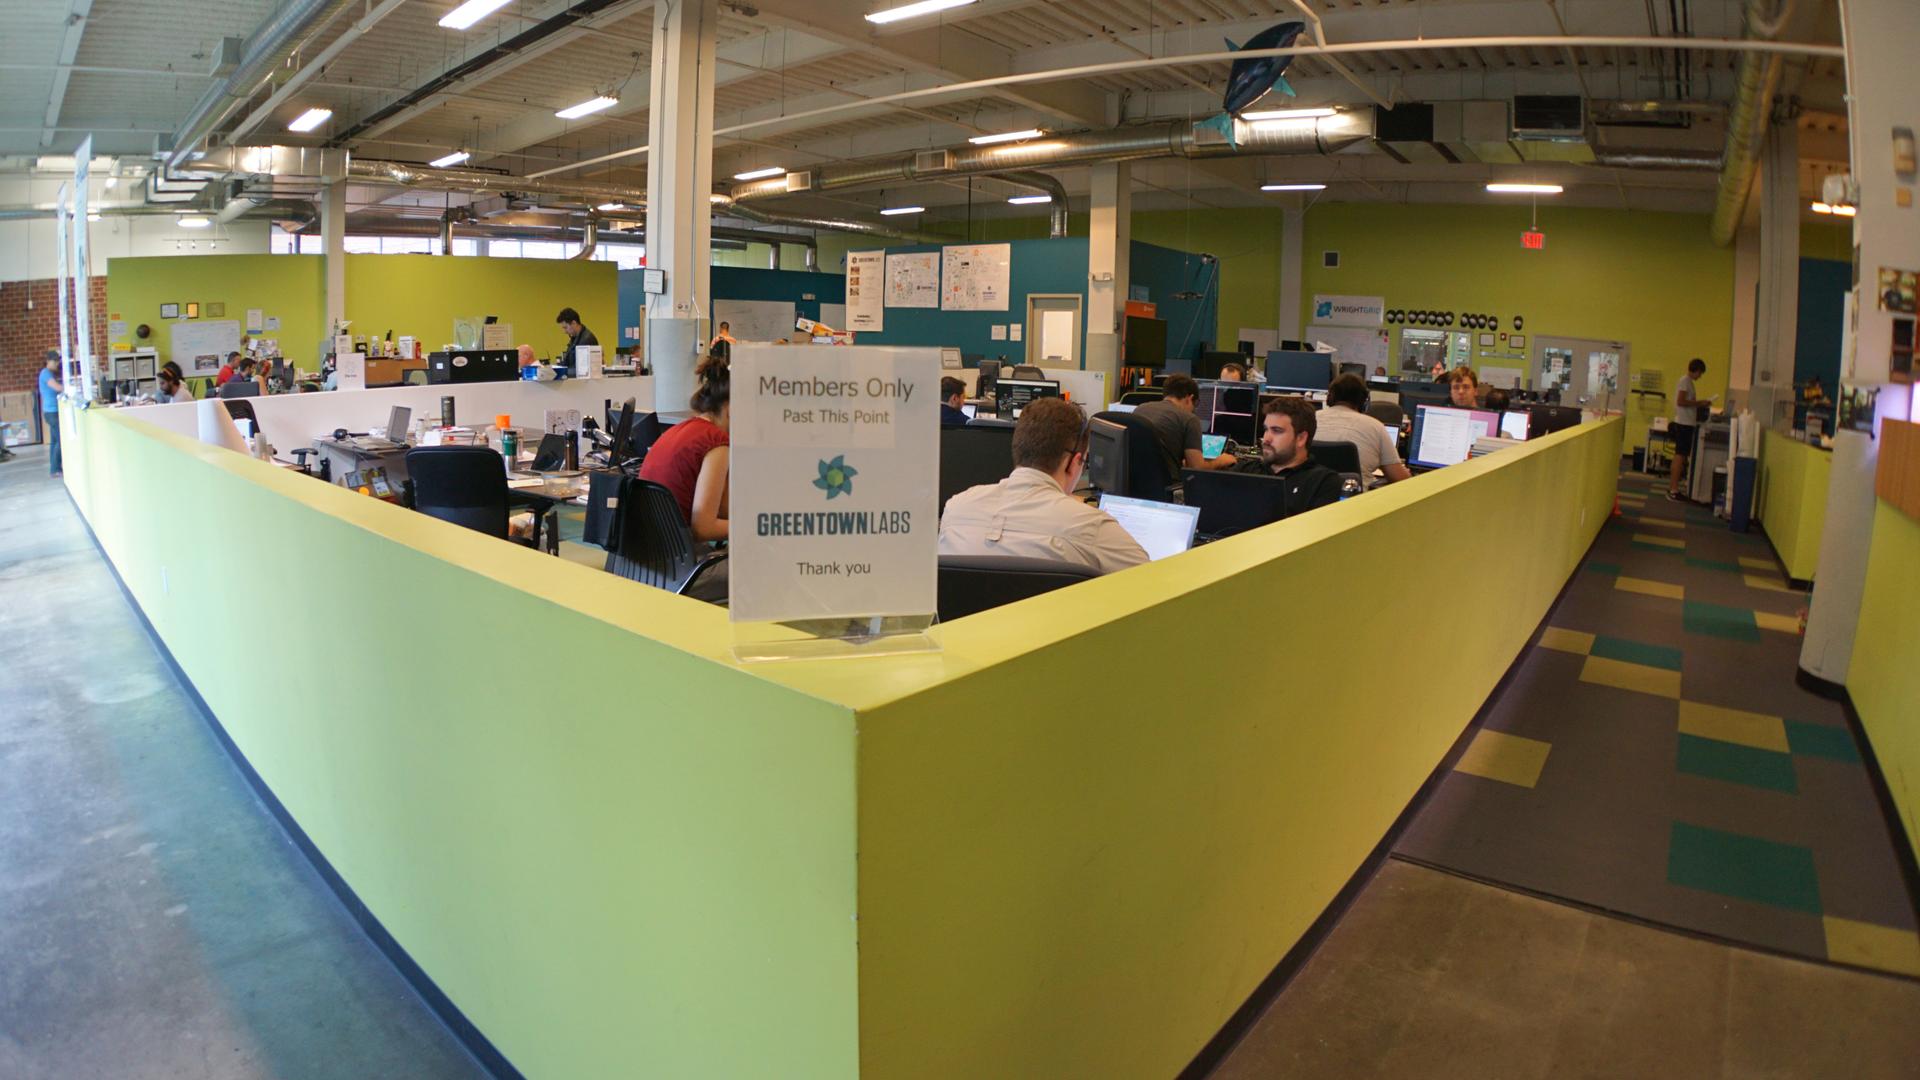 Greentown Labs in Somerville, Mass. has become the nation’s largest clean technology incubator, housing more than 50 small companies. 